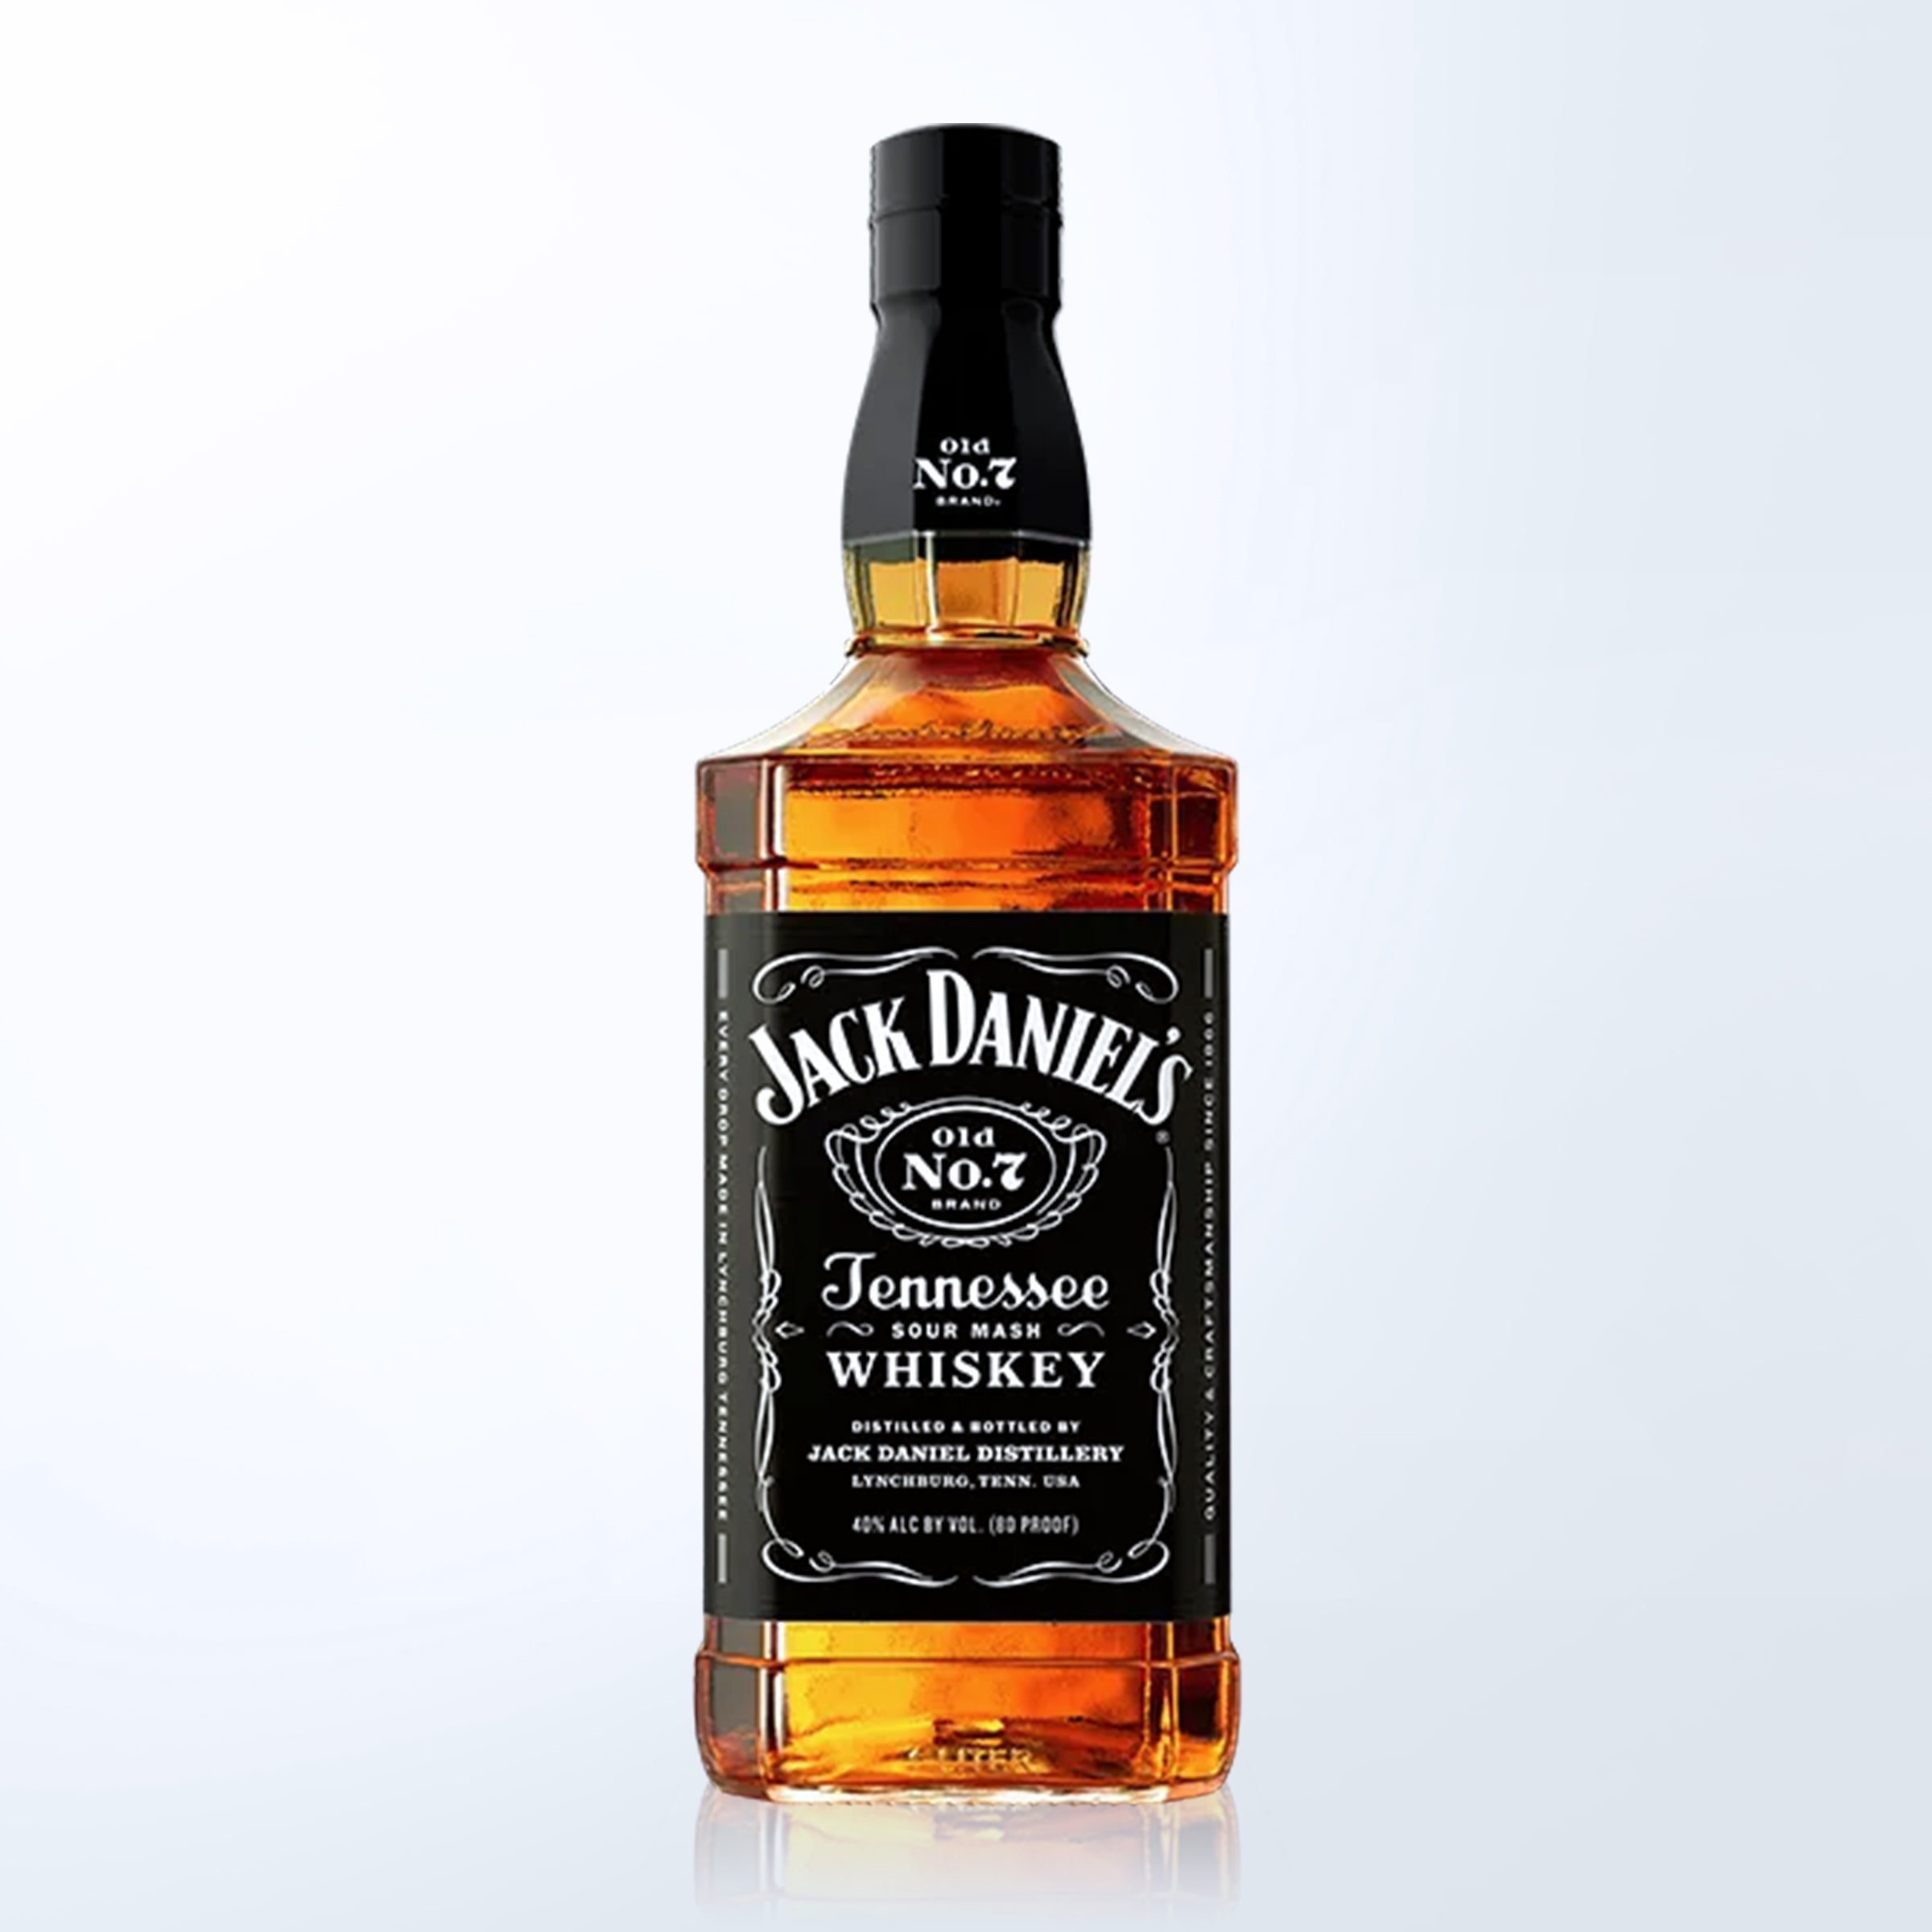 Jack Daniel’s Old No.7 with Engraving |傑克丹尼老7號威士忌(含人像雕刻） - Design Your Own Wine